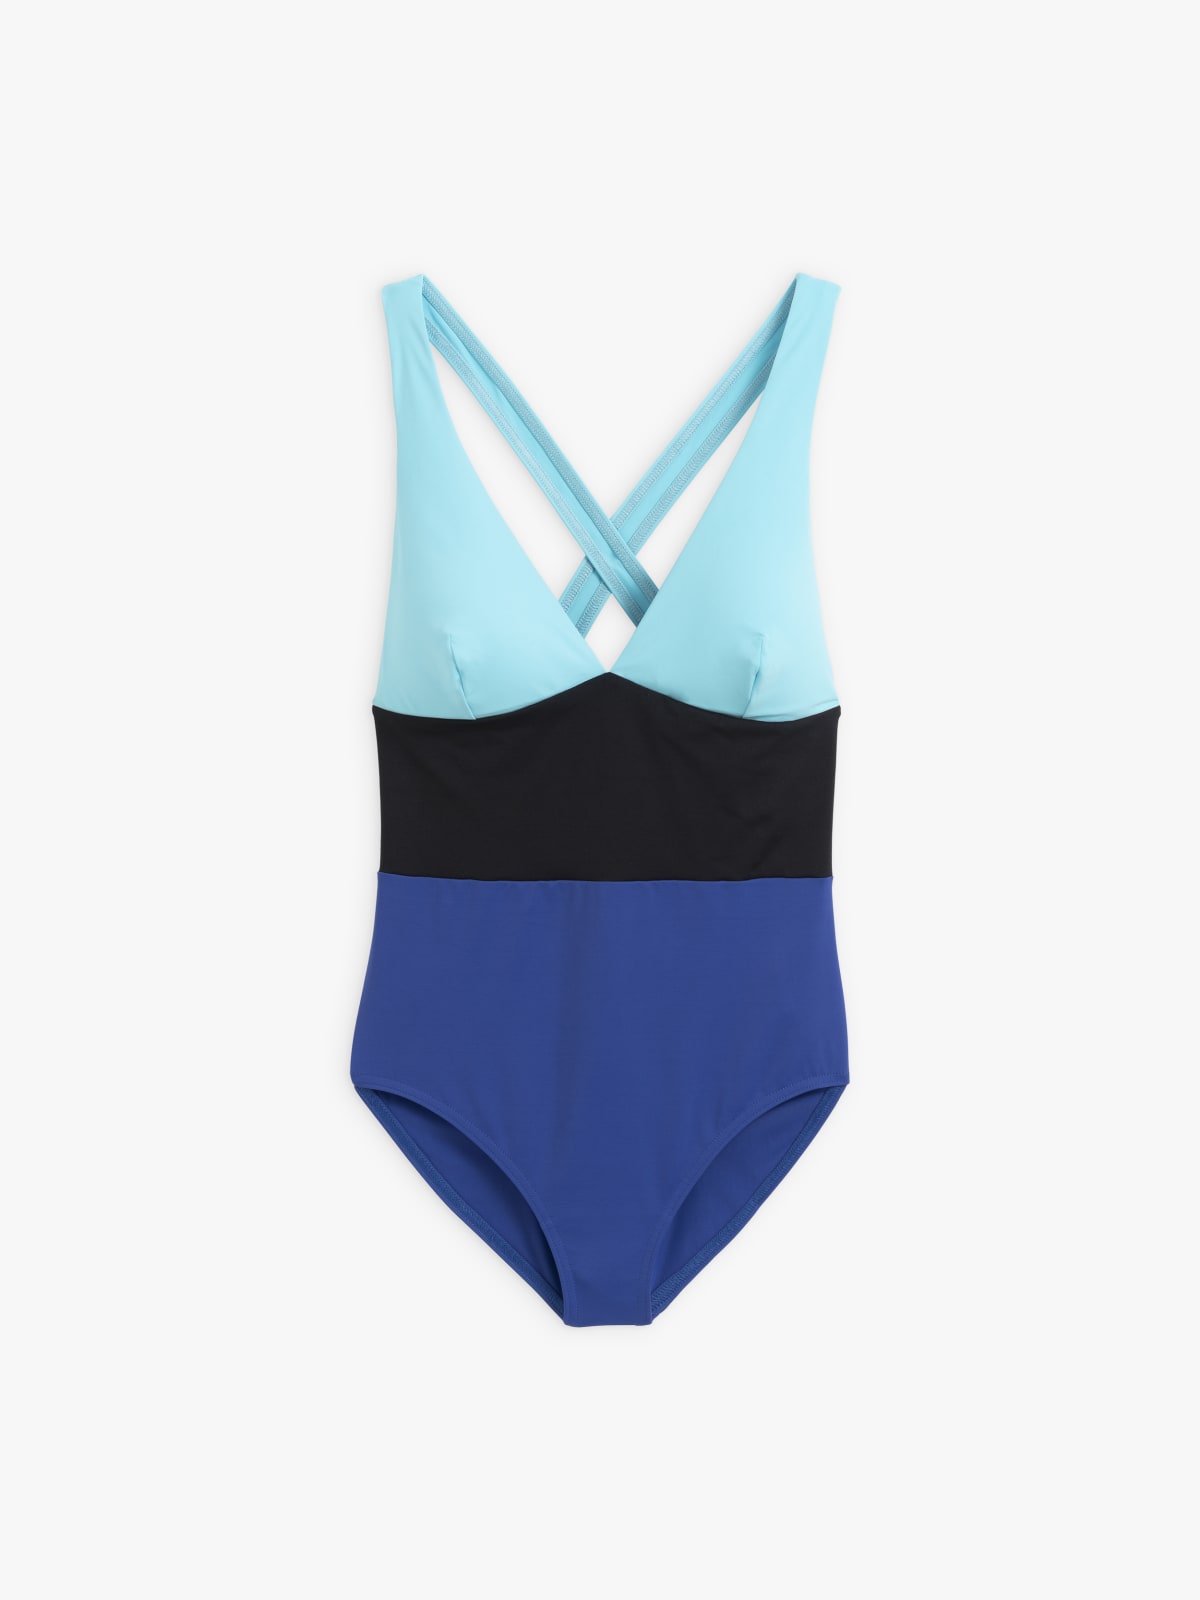 lagoon blue and blue one piece Amele swimsuit